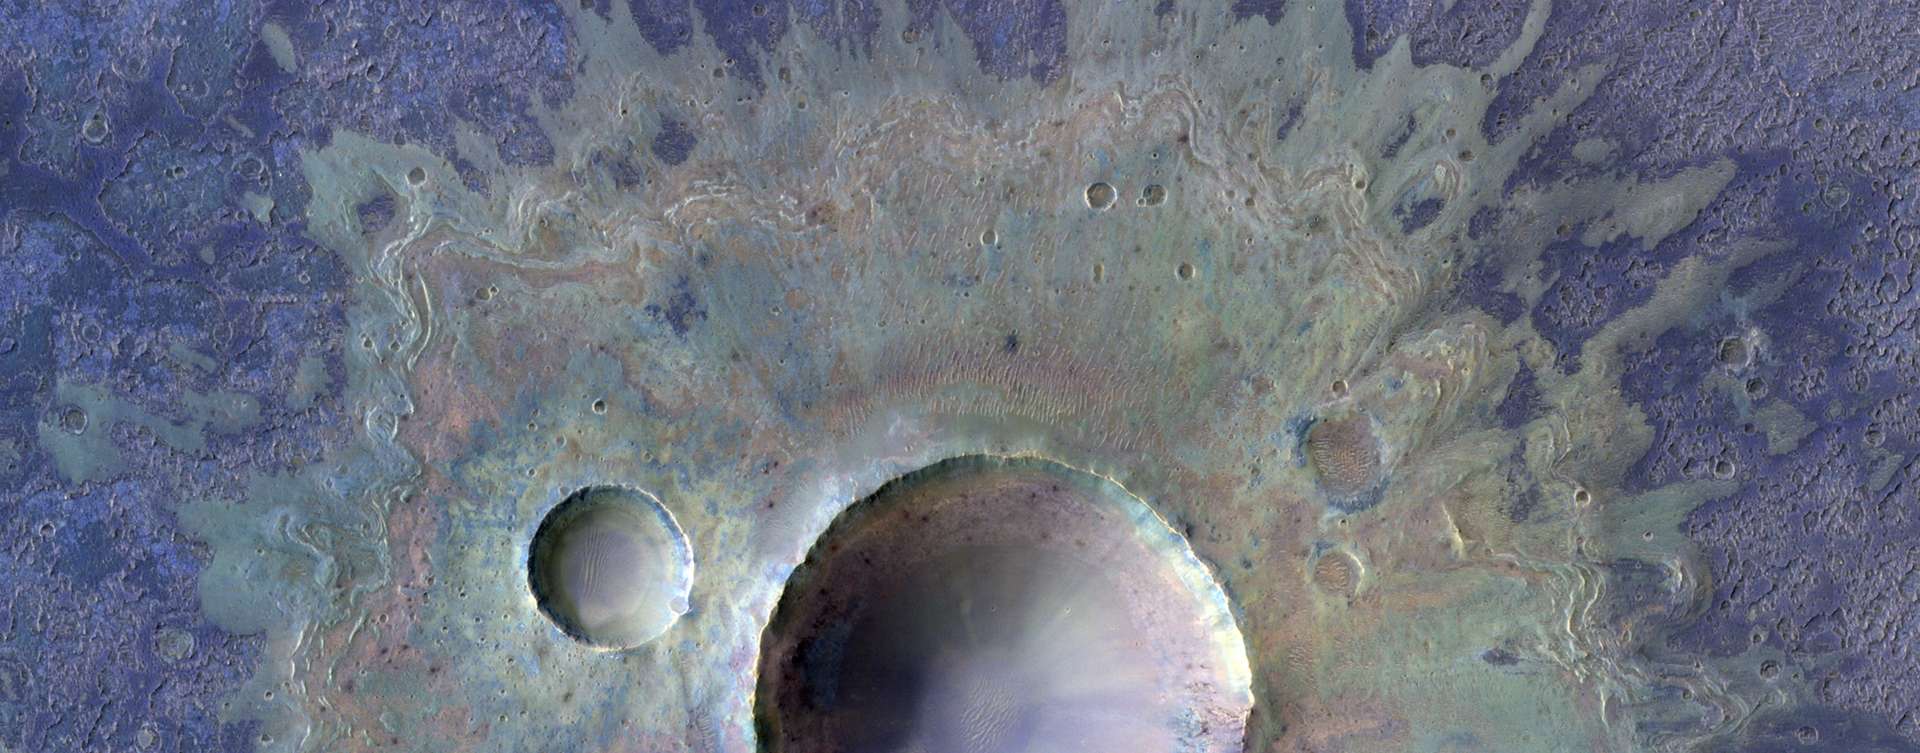 This magnificent crater bears witness to the existence of water ice on Mars